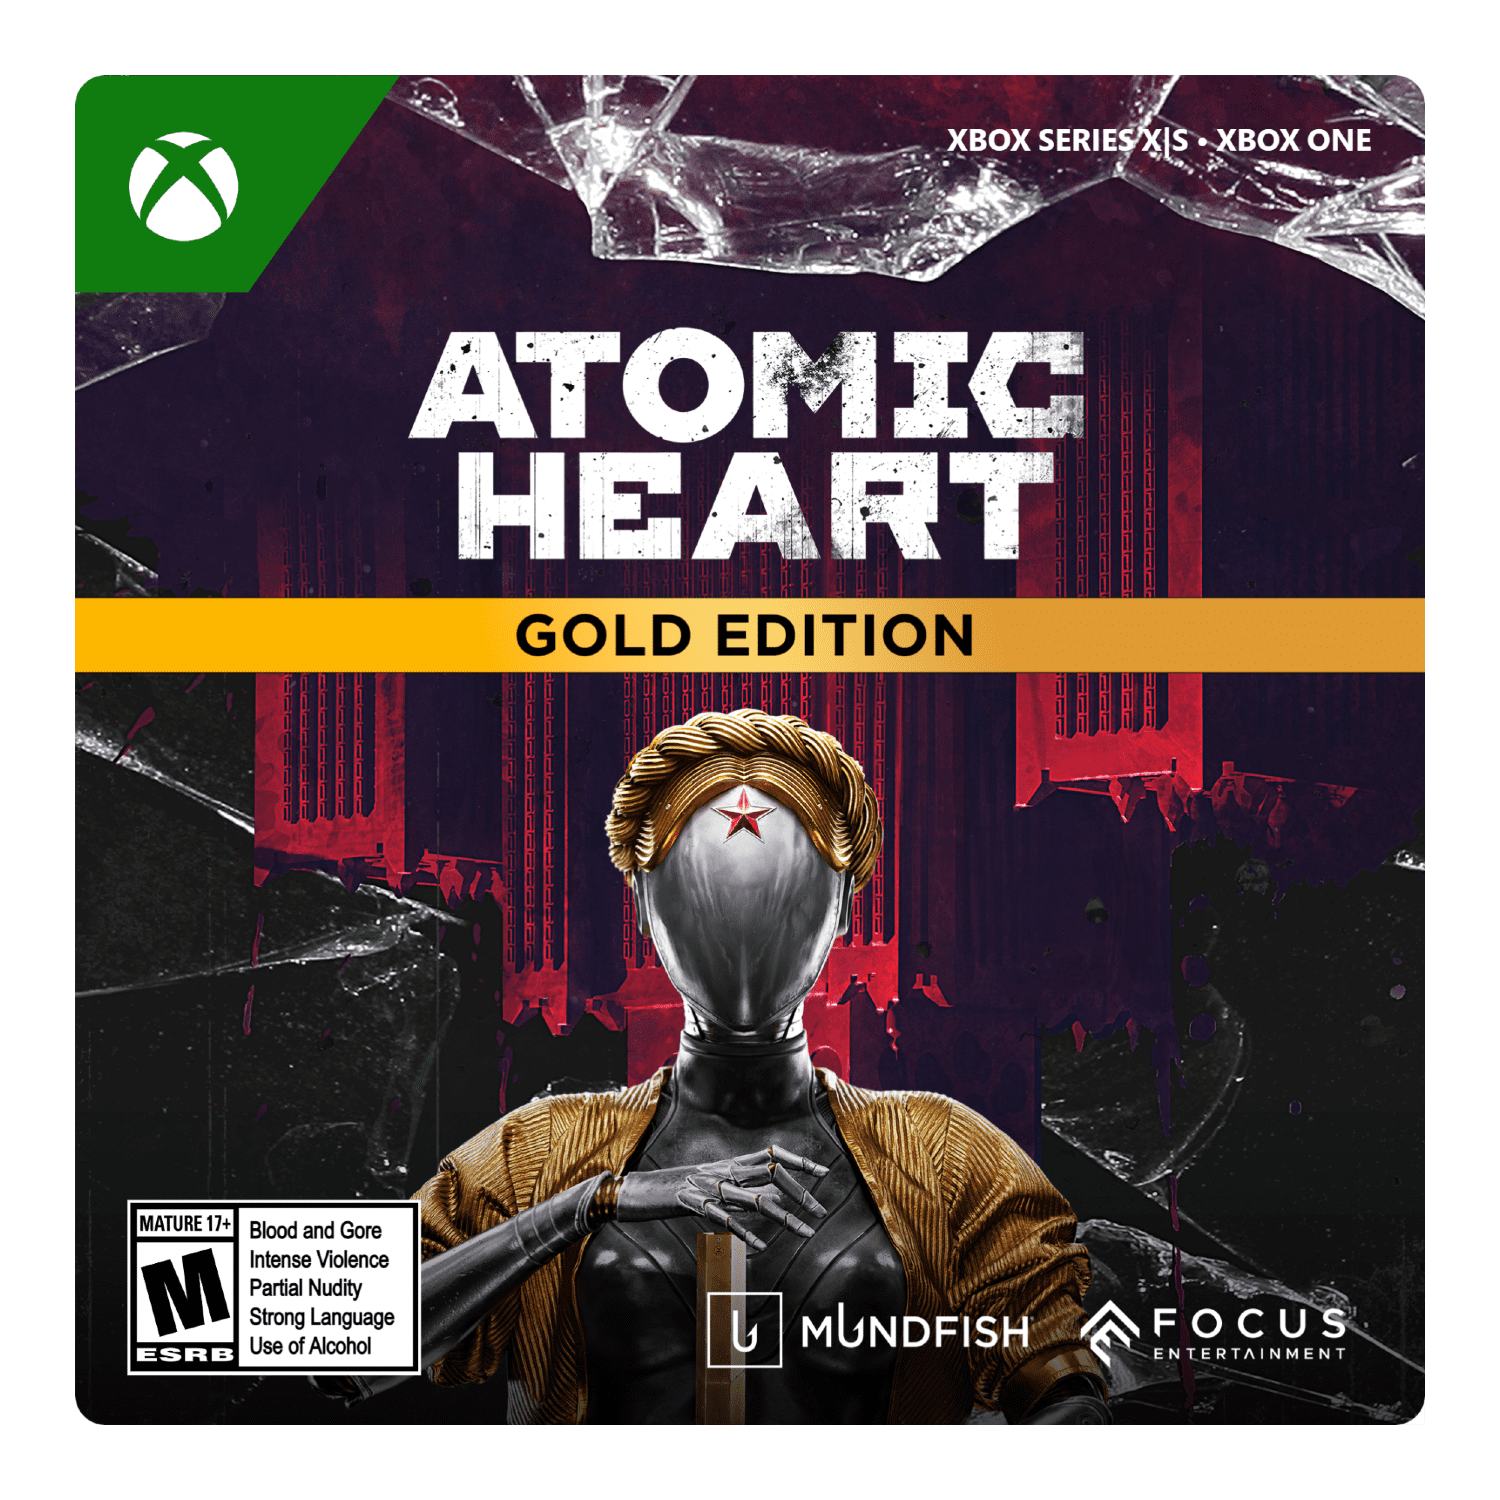 metacritic on X: Expect reviews for Atomic Heart (Sony/Xbox/PC) early  tomorrow:  Any Metascore predictions for this one?   / X